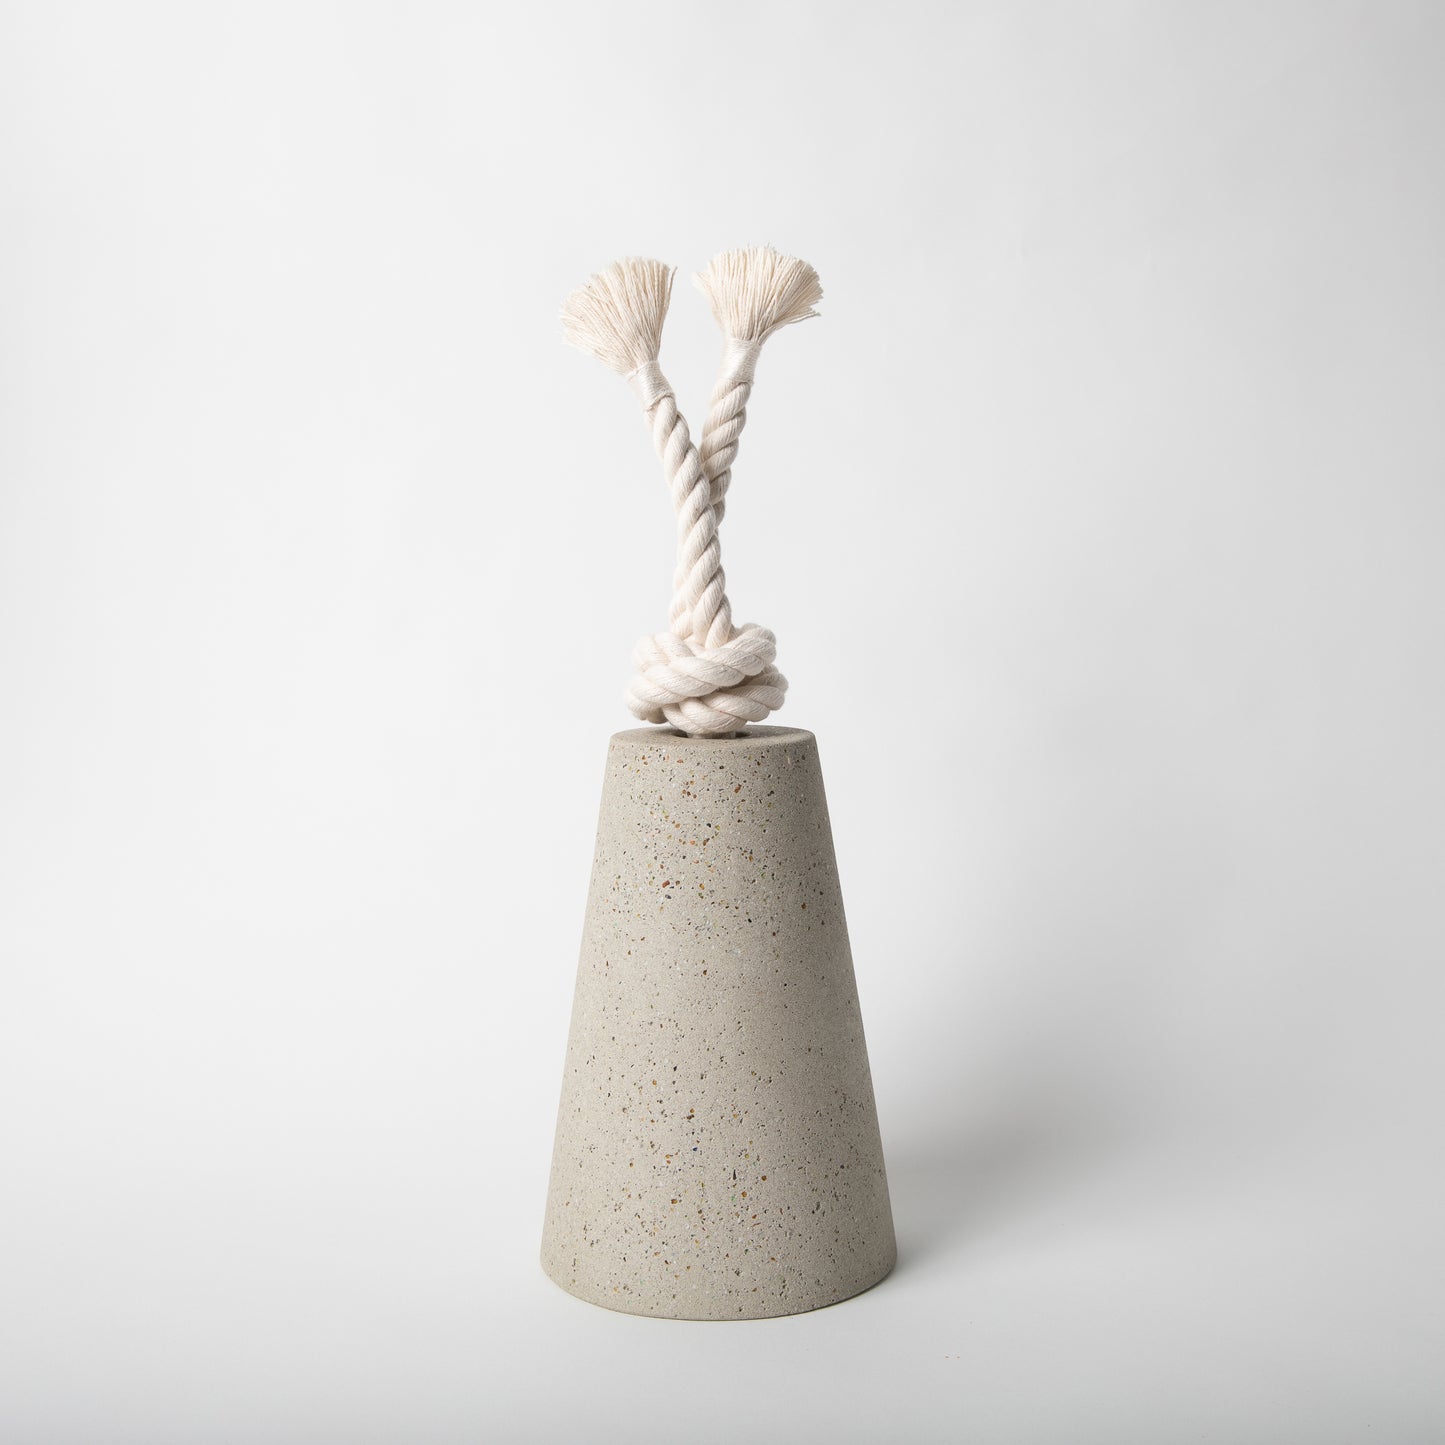 Concrete terrazzo doorstop with cotton rope in natural.